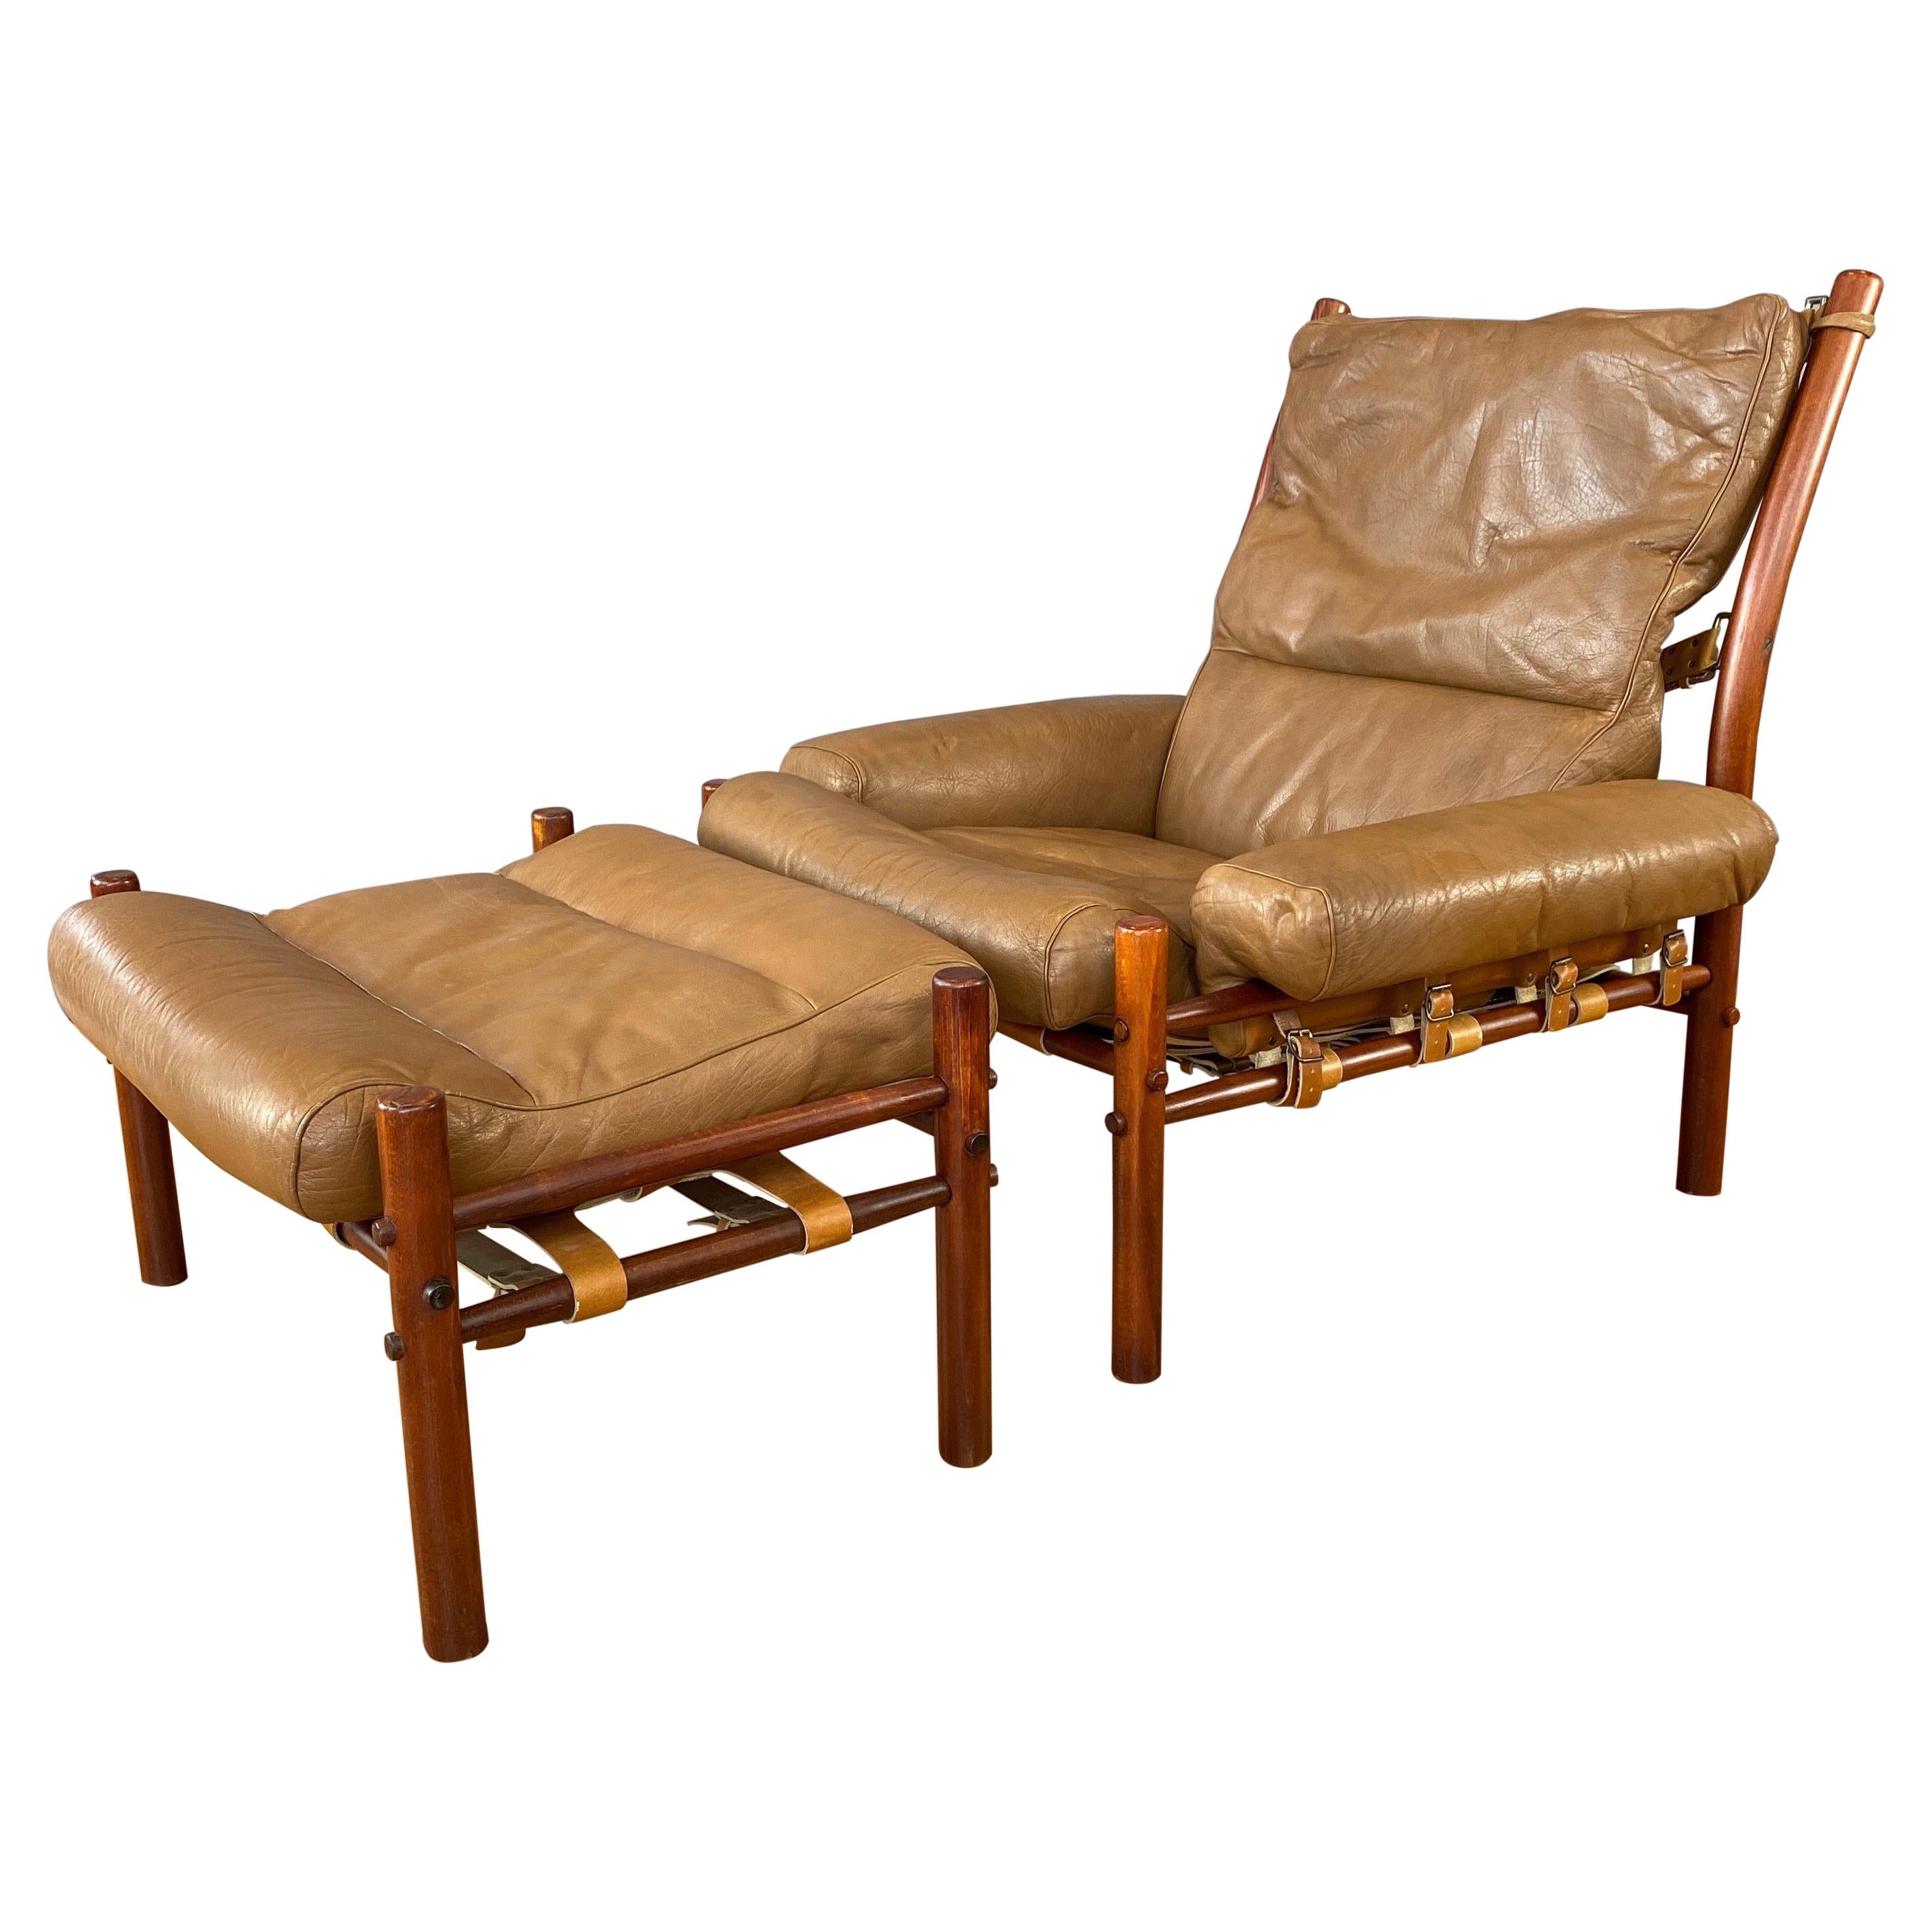 Arne Norell Inca Lounge Chair & Ottoman in Teak-Colored Beech and Leather, 1970s